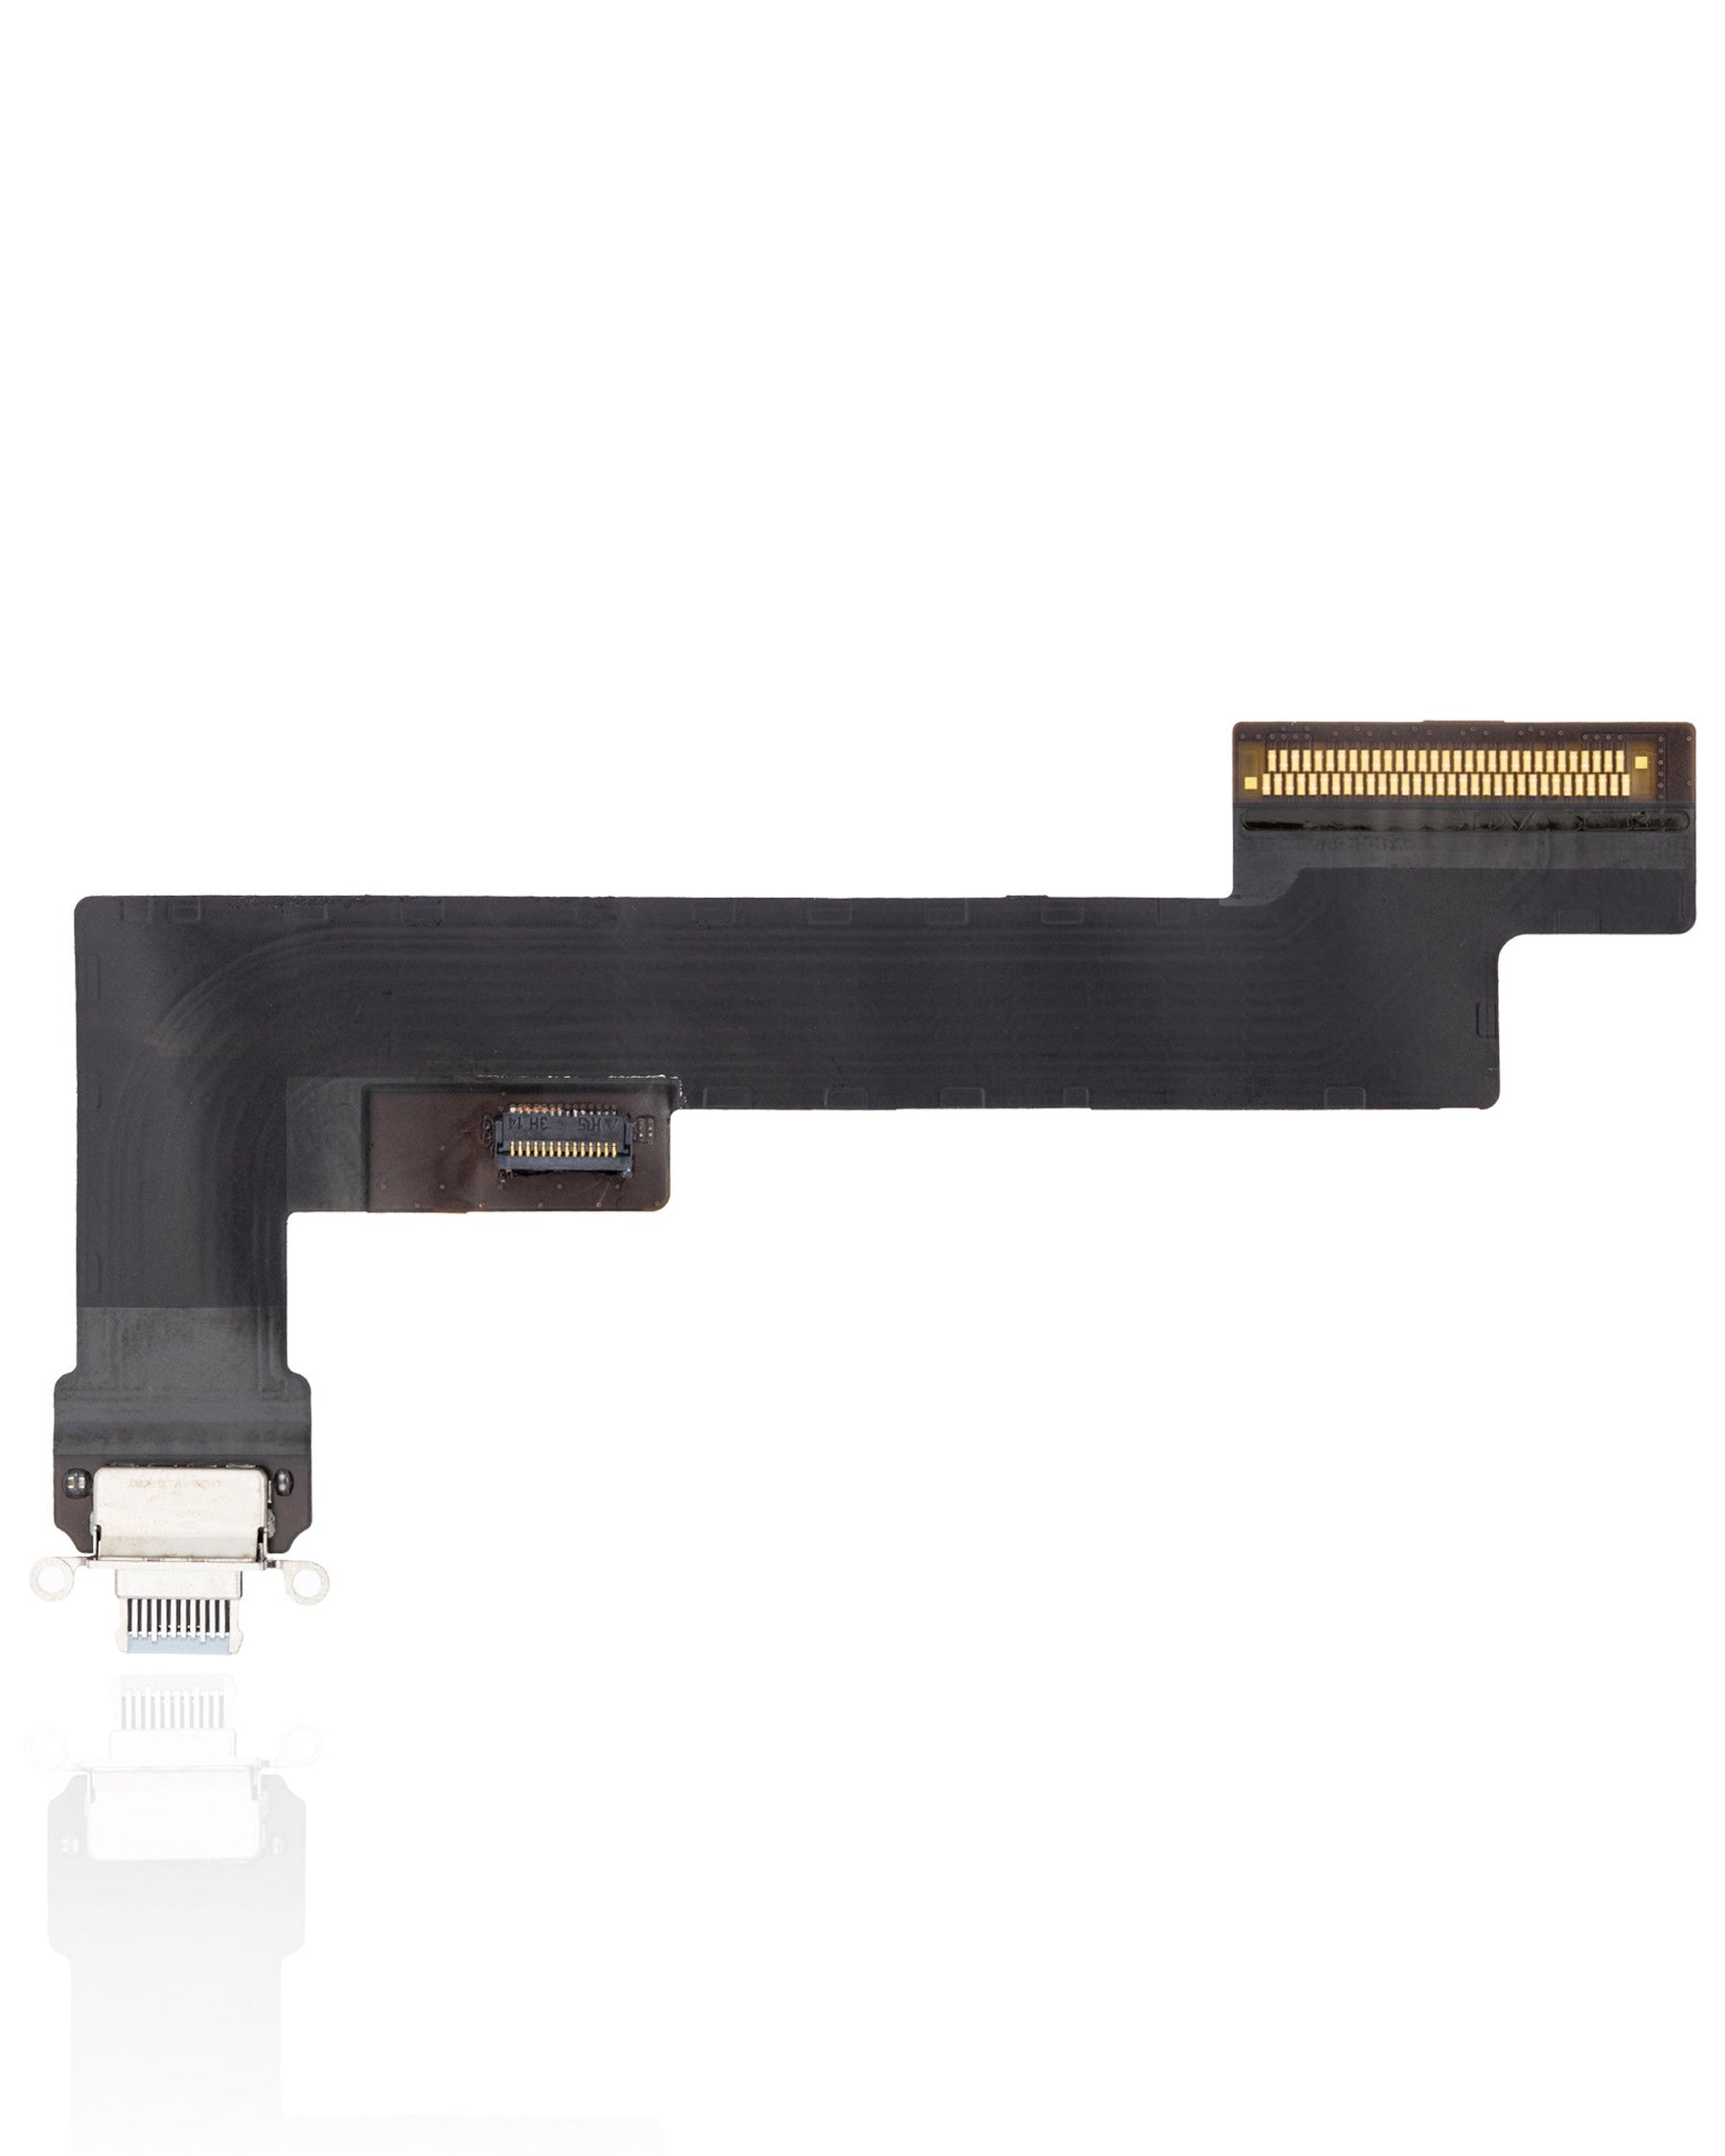 CHARGING PORT FLEX CABLE (WIFI VERSION) COMPATIBLE FOR IPAD AIR 4 - SKY BLUE